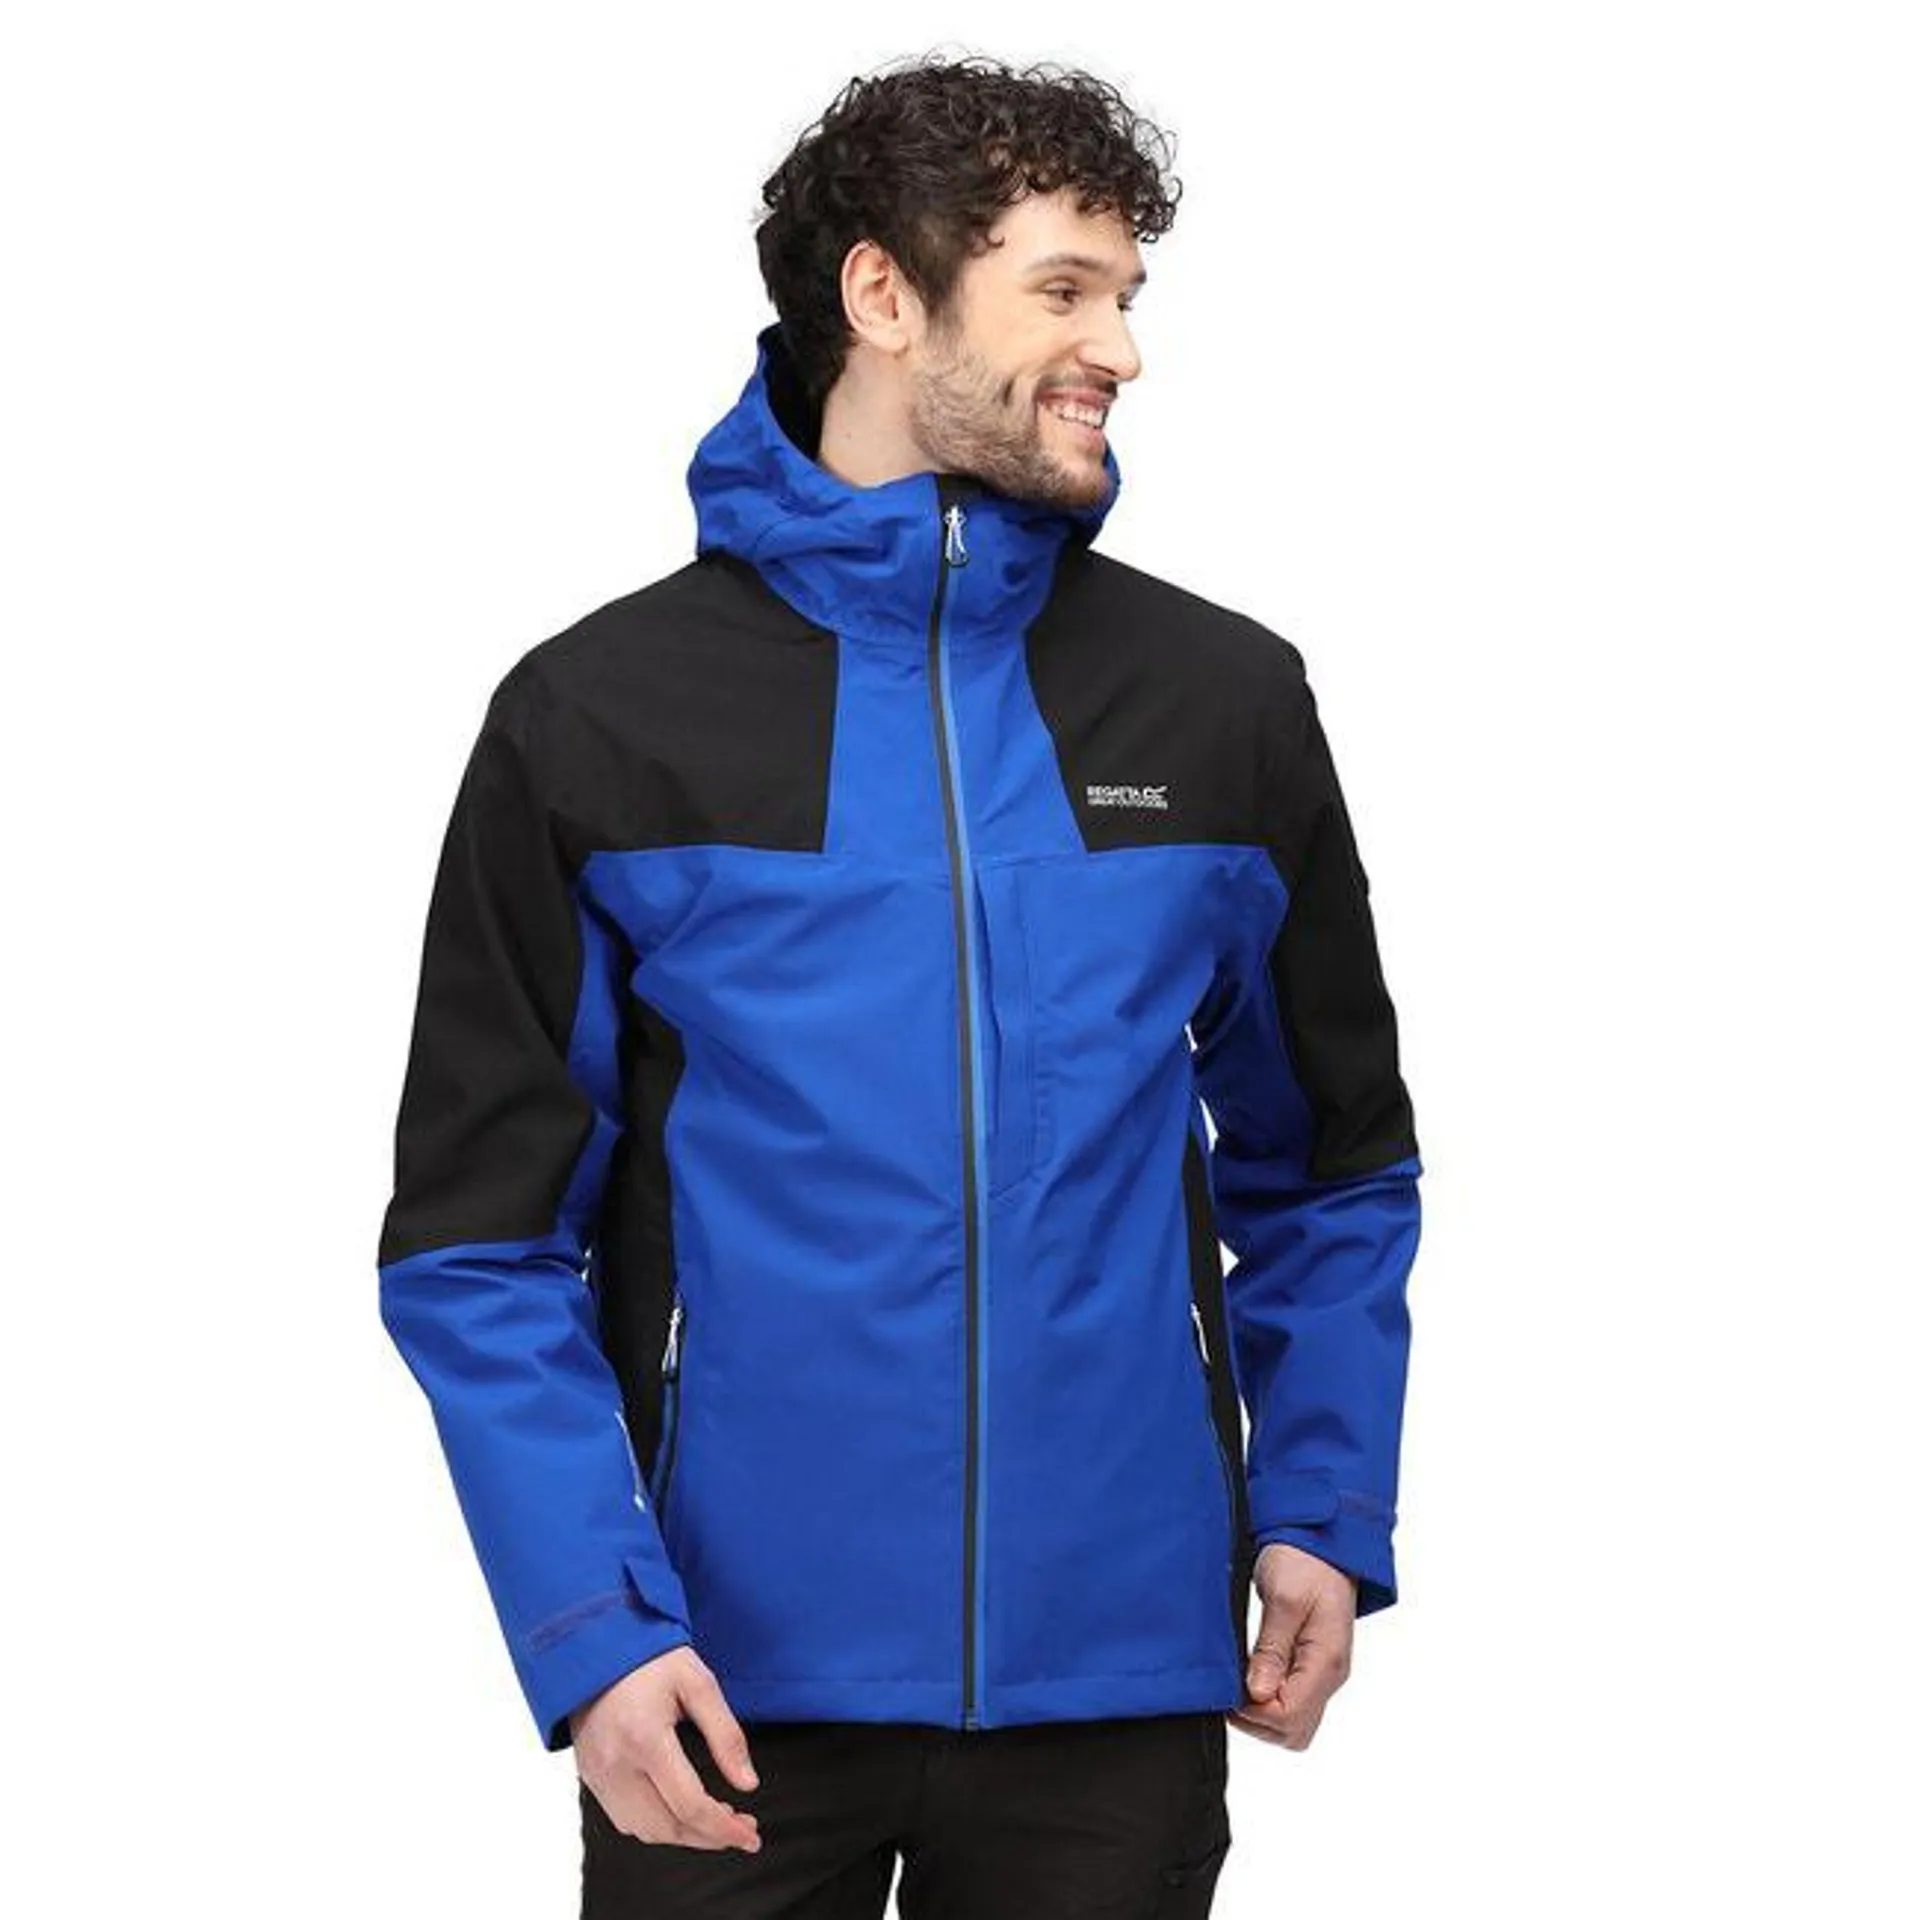 Wentwood VI 3-In-1 Waterproof Insulated Jacket